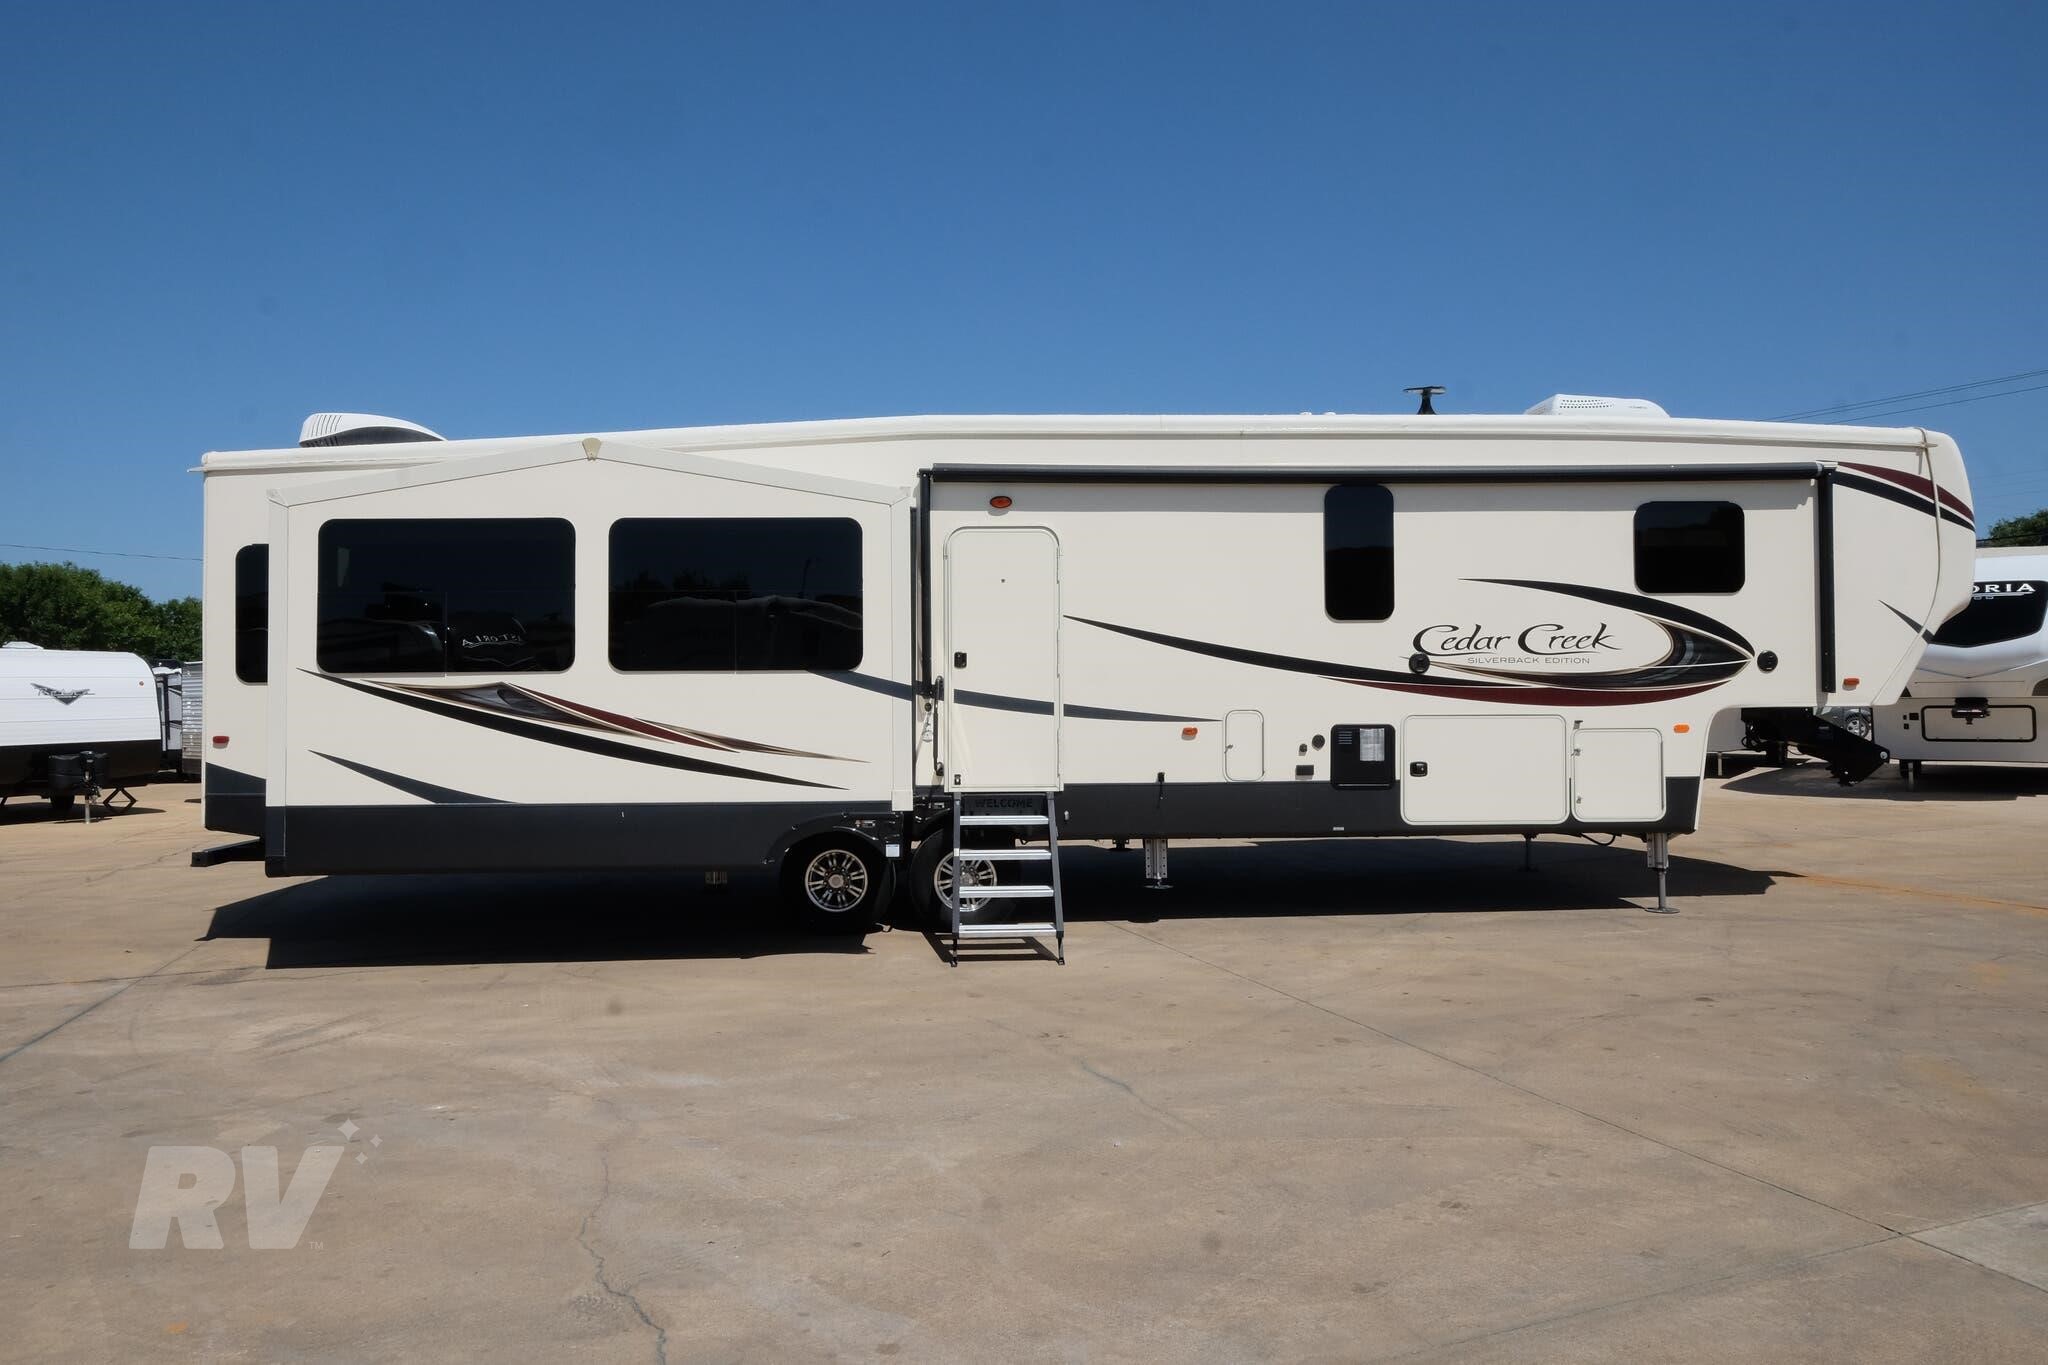 2018 FOREST RIVER CEDAR CREEK SILVERBACK 37MBH For Sale in Kennedale, Texas | RVUniverse.com 2018 Forest River Cedar Creek Silverback 37mbh